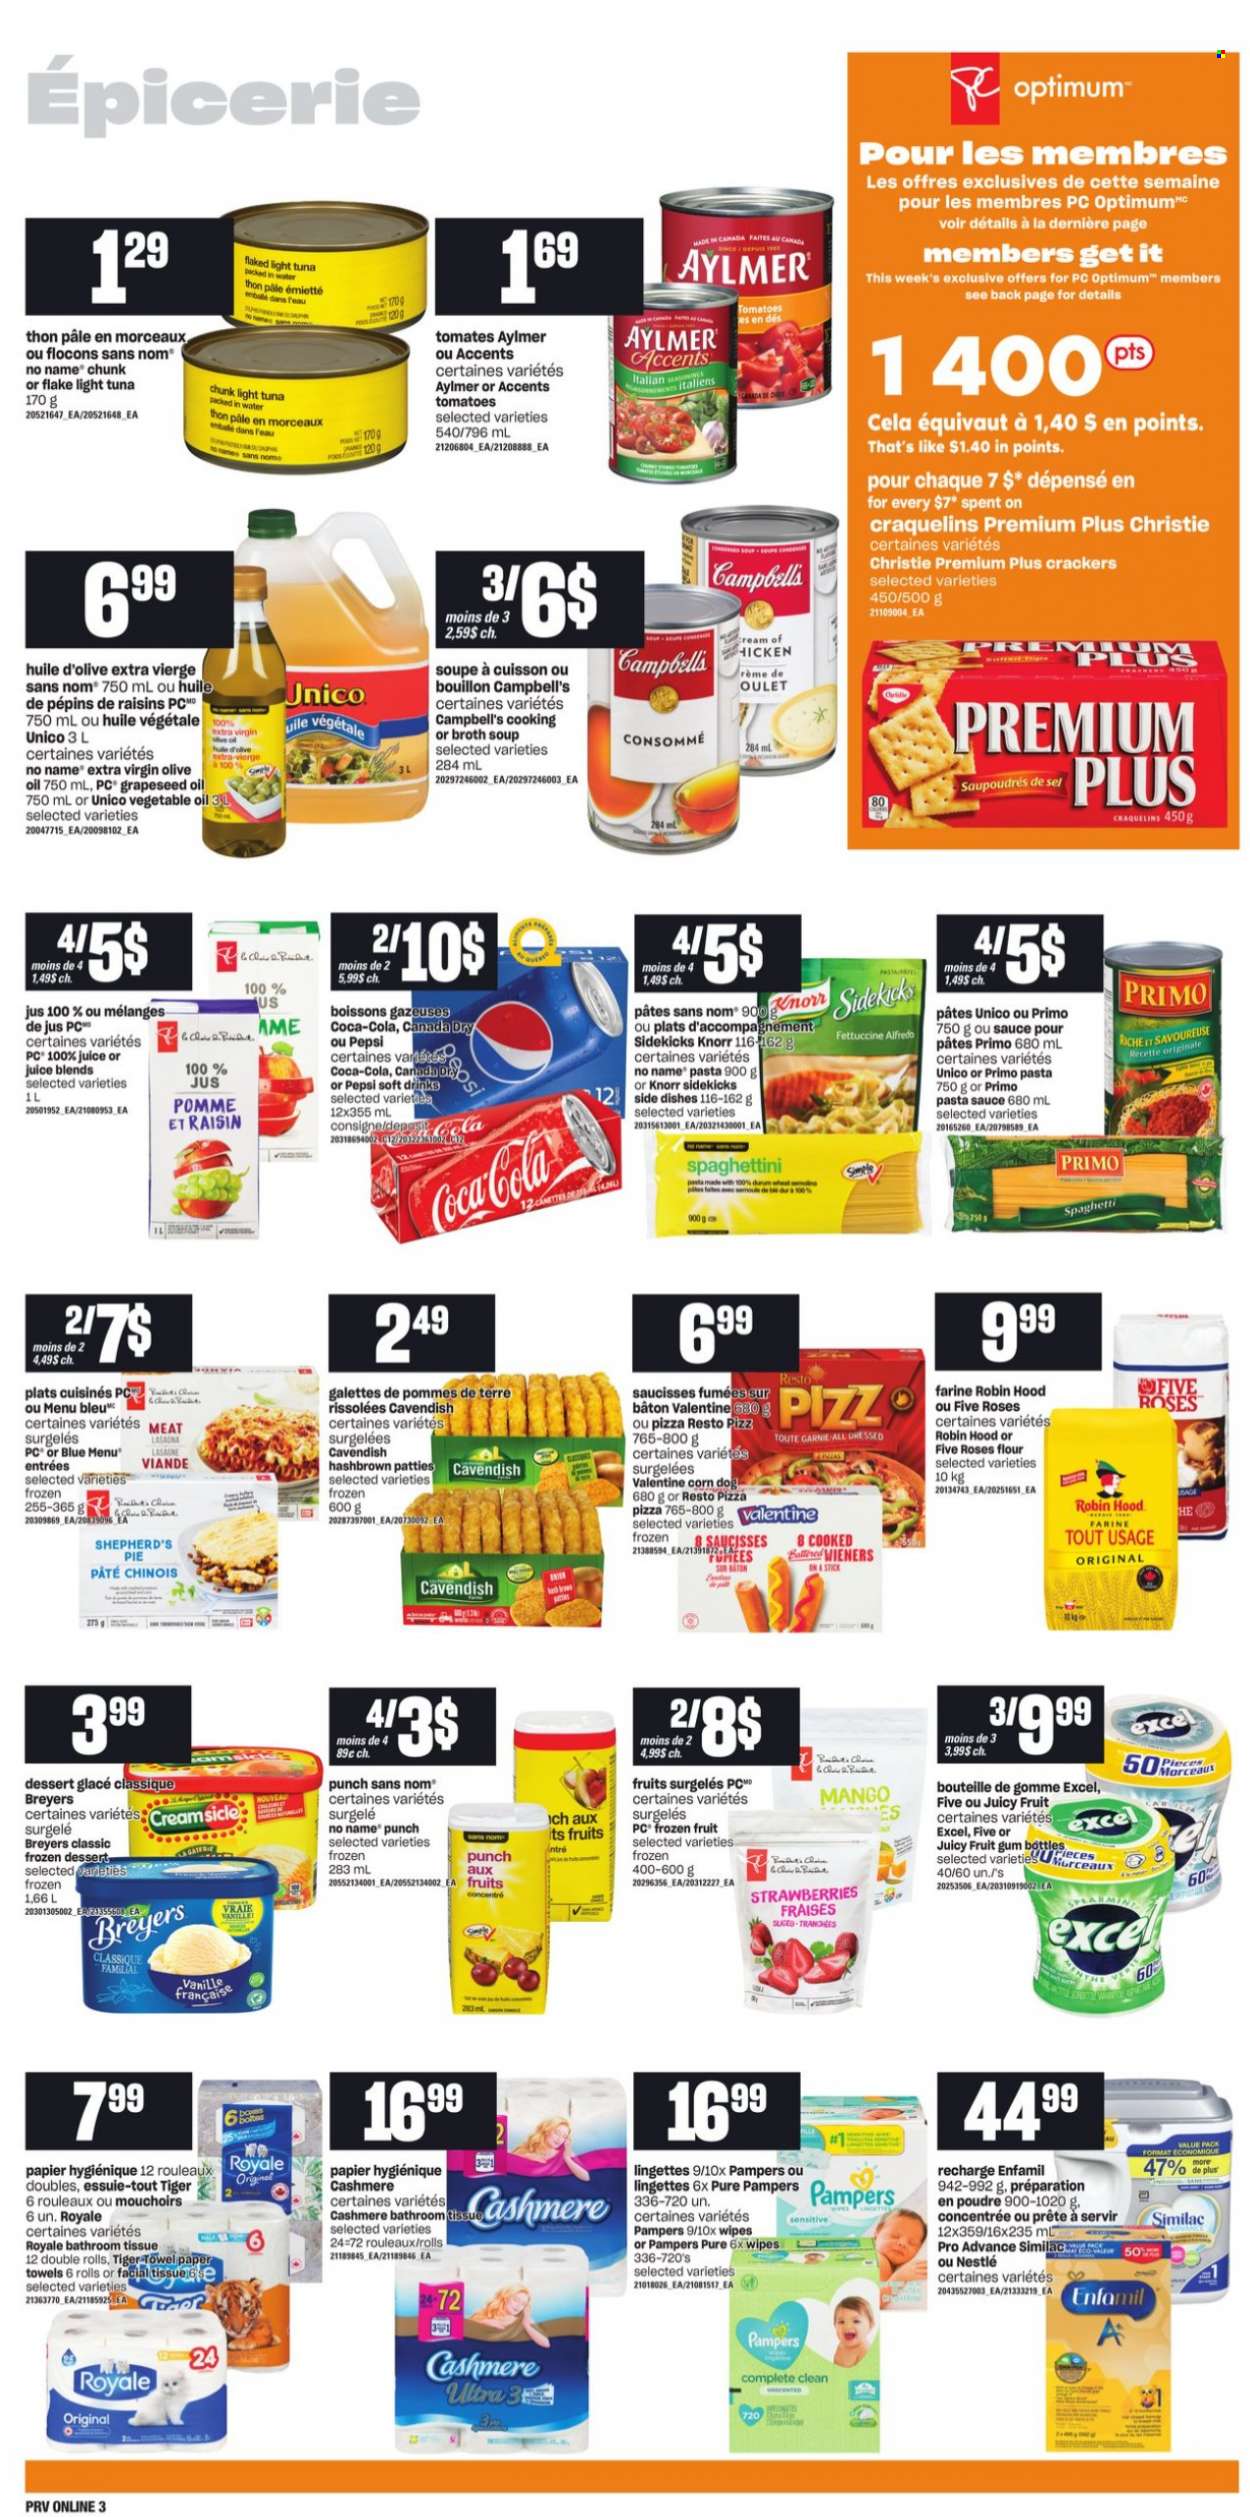 thumbnail - Provigo Flyer - October 14, 2021 - October 20, 2021 - Sales products - pie, corn, mango, strawberries, tuna, No Name, Campbell's, spaghetti, pizza, pasta sauce, soup, sauce, lasagna meal, crackers, bouillon, flour, broth, light tuna, extra virgin olive oil, vegetable oil, olive oil, oil, grape seed oil, dried fruit, Canada Dry, Coca-Cola, Pepsi, juice, soft drink, punch, Enfamil, Similac, wipes, bath tissue, kitchen towels, paper towels, XTRA, Knorr, Nestlé, raisins, Pampers. Page 7.